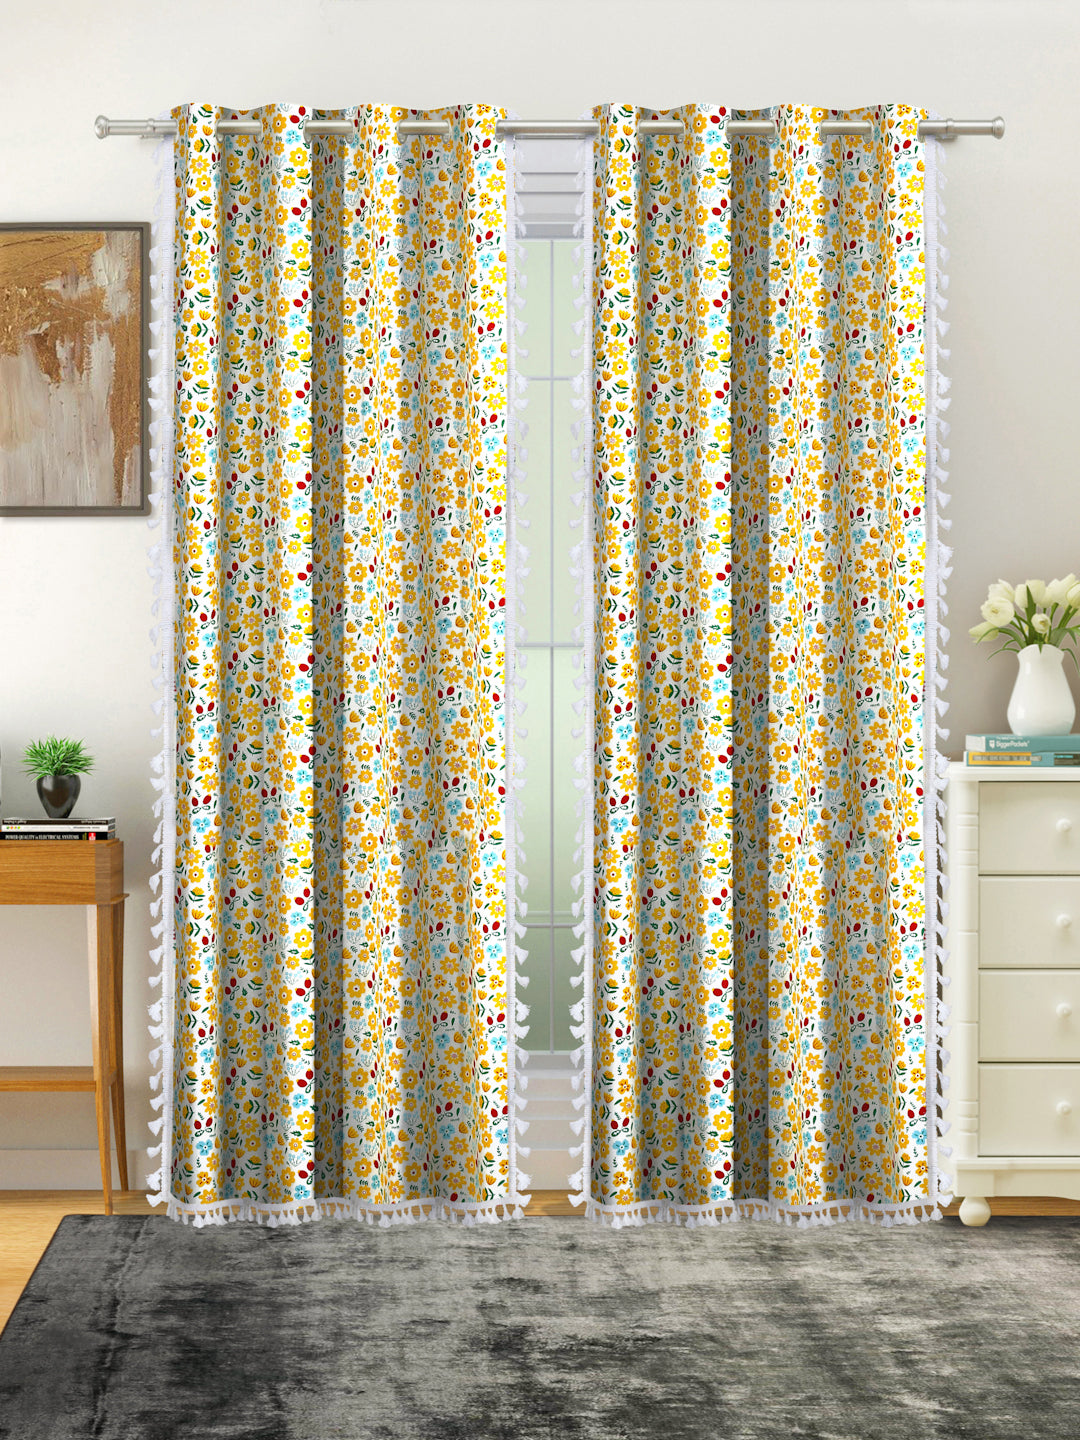 Cotton Printed Boho Light Filtering Door Curtain with Lace- Yellow (Pack of 1)